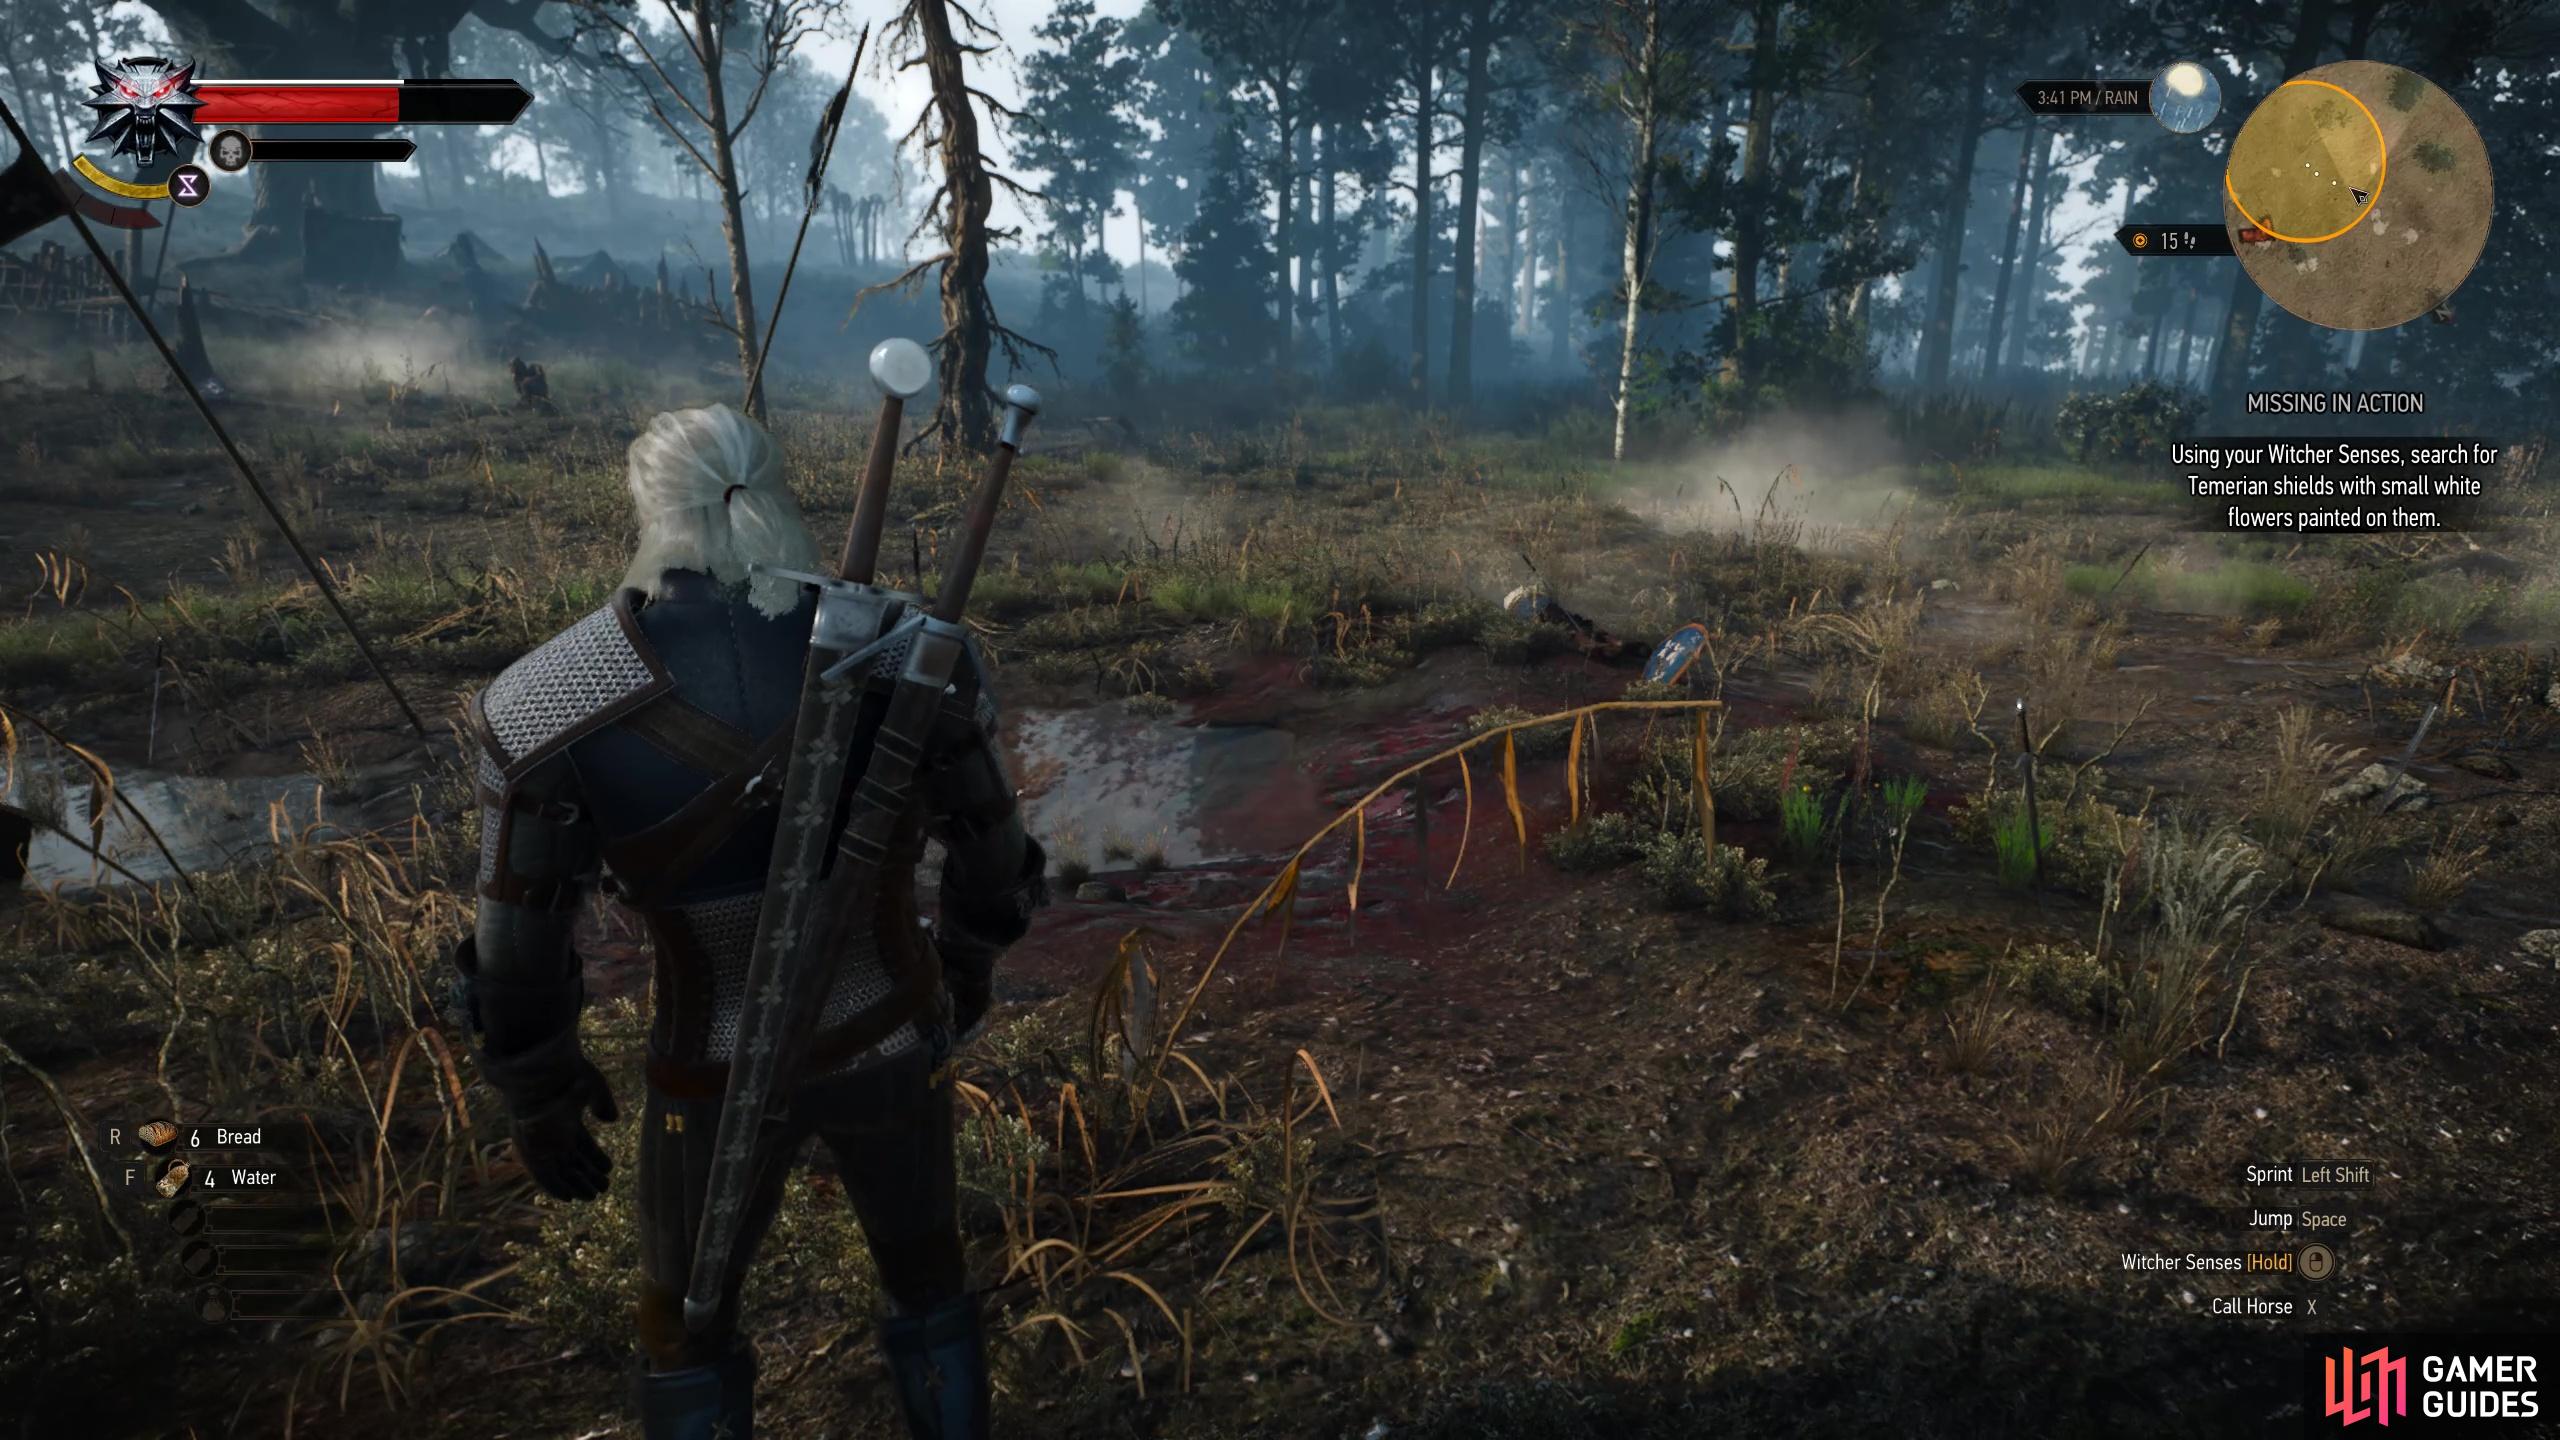 Exploring the battlefield is a pain but there is actually only a small search circle as indicated on your mini-map.